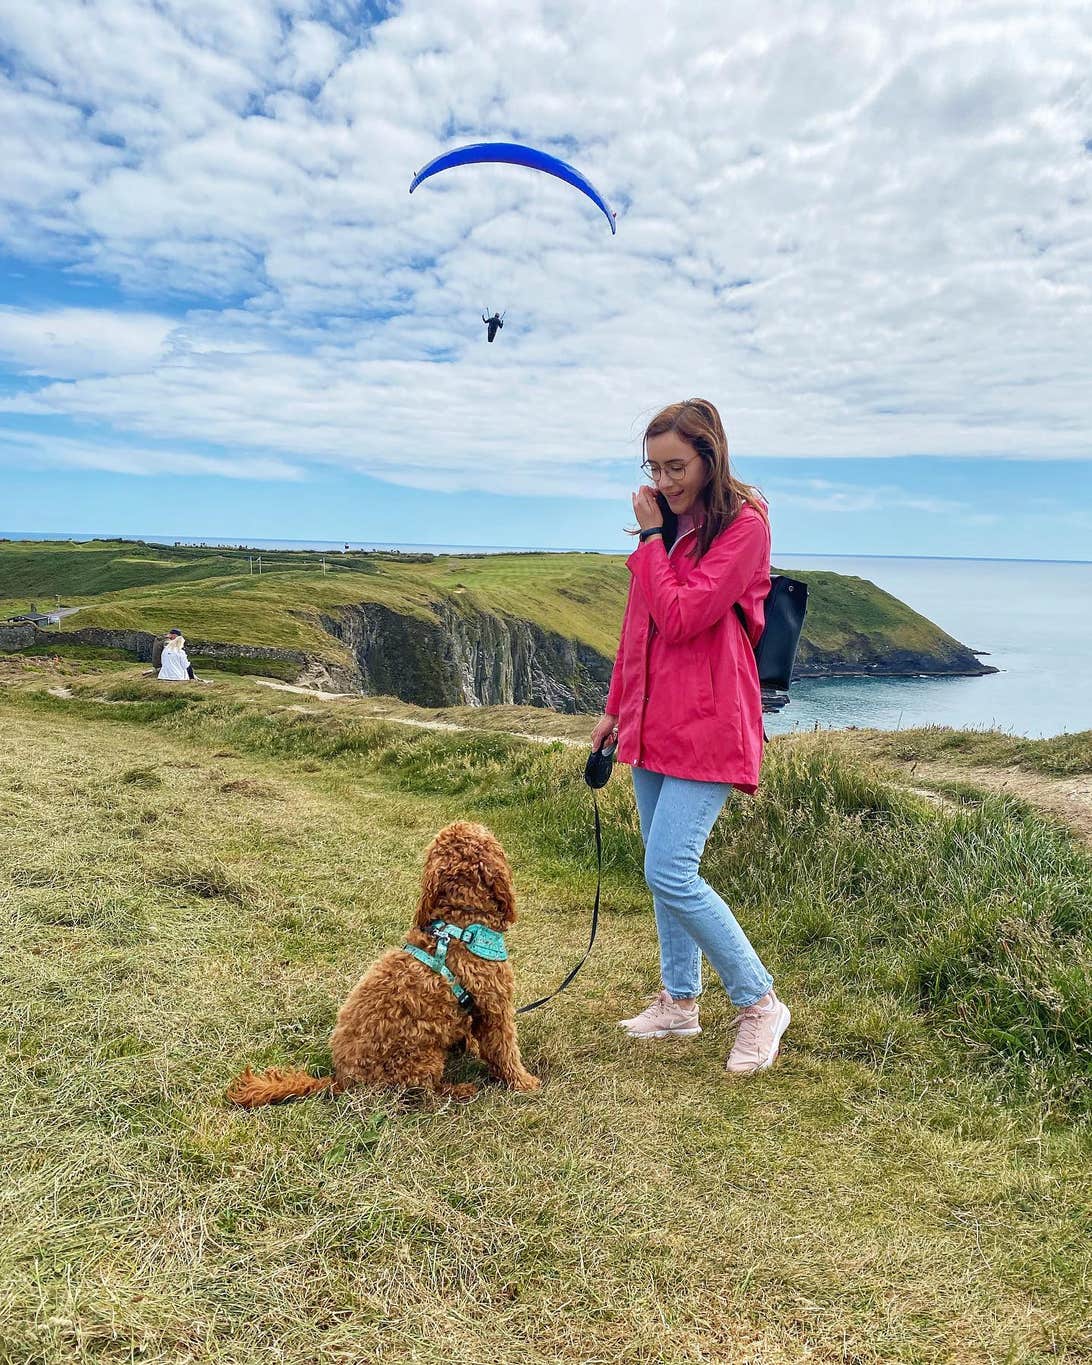 A womand and her dog enjoy the scilly cliff walk in Kinsale, with a paraglider in the background.